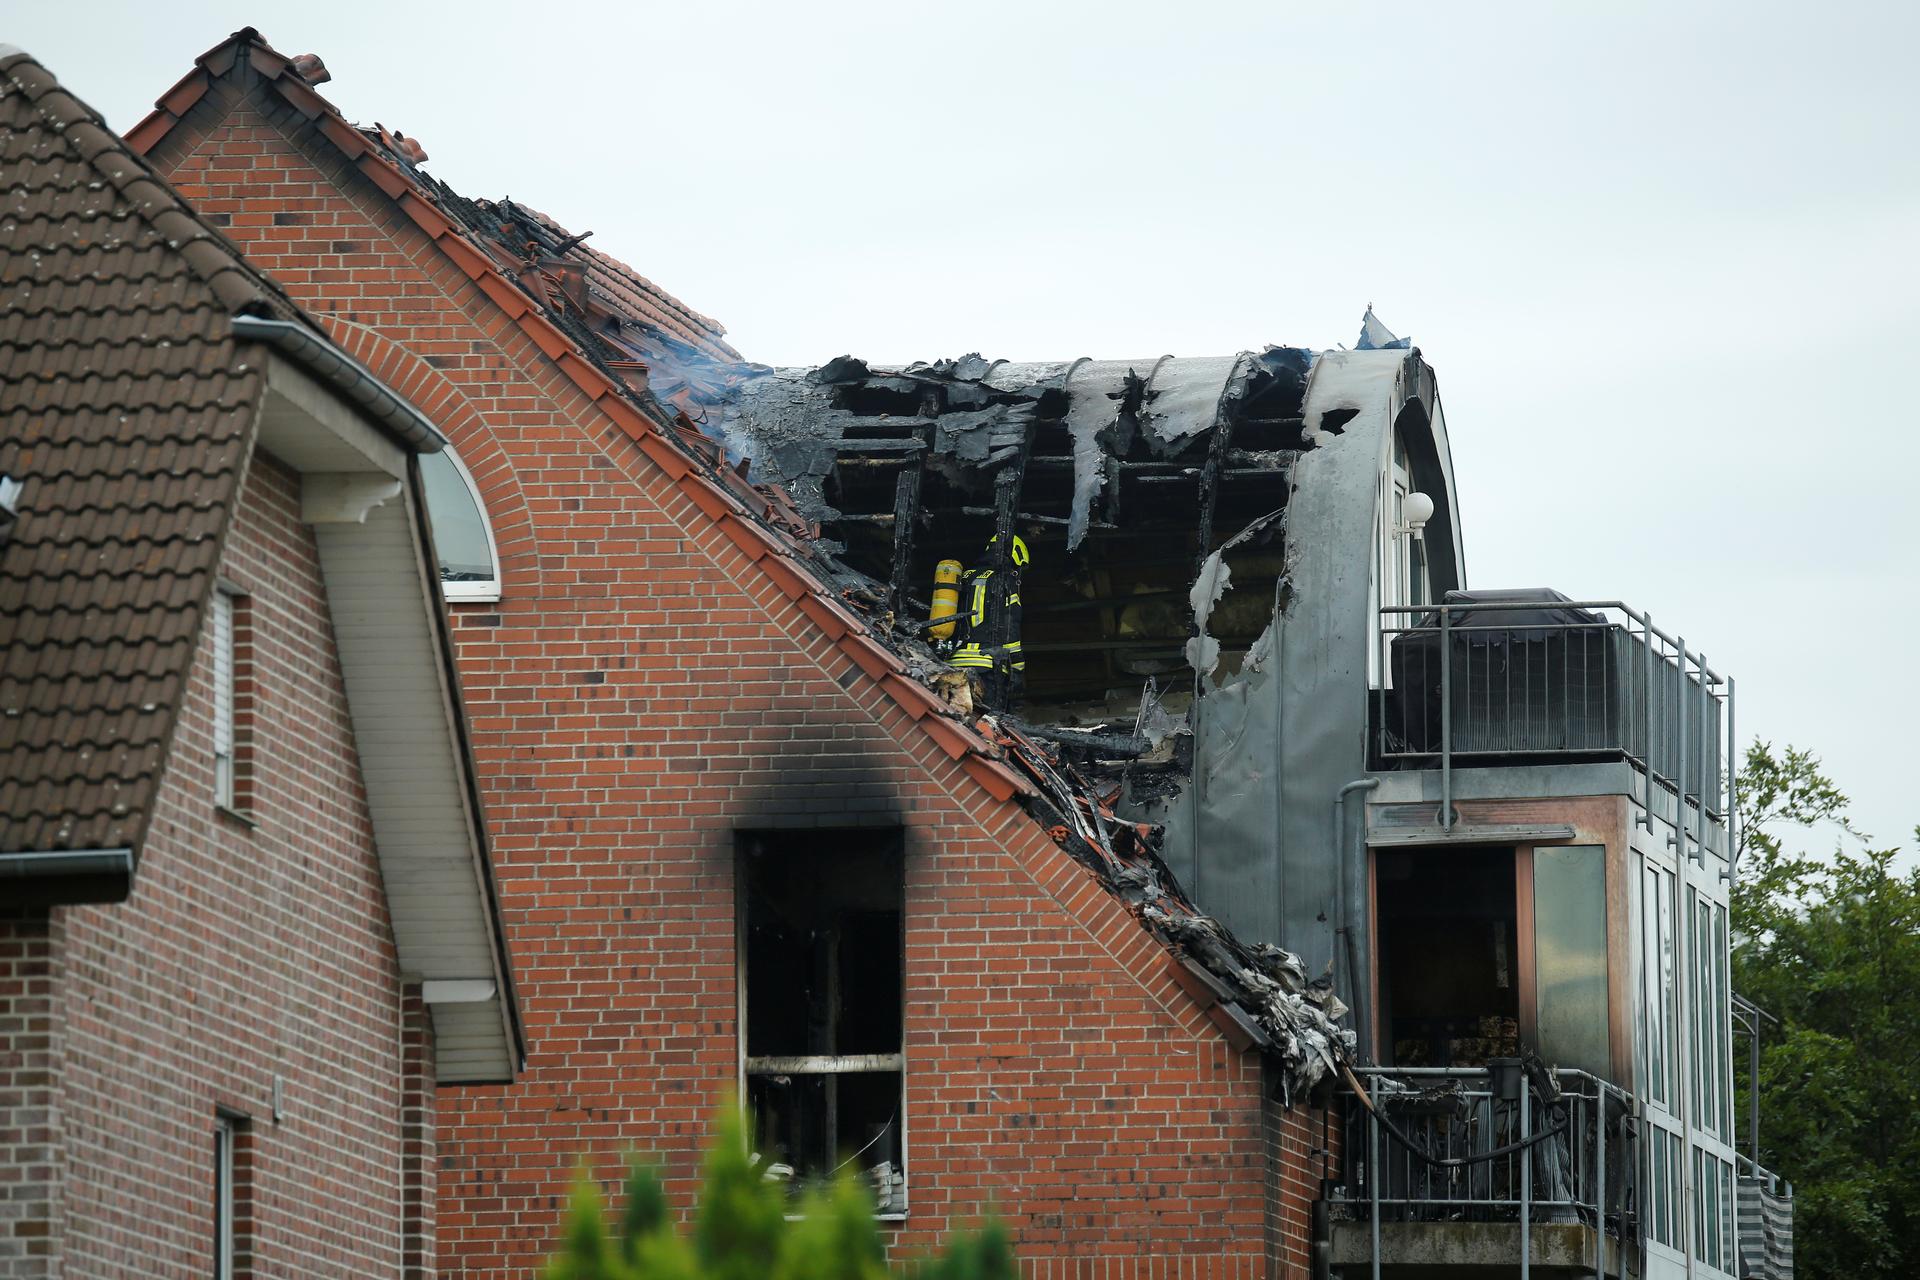 Small plane crashes into house in Germany, killing three people